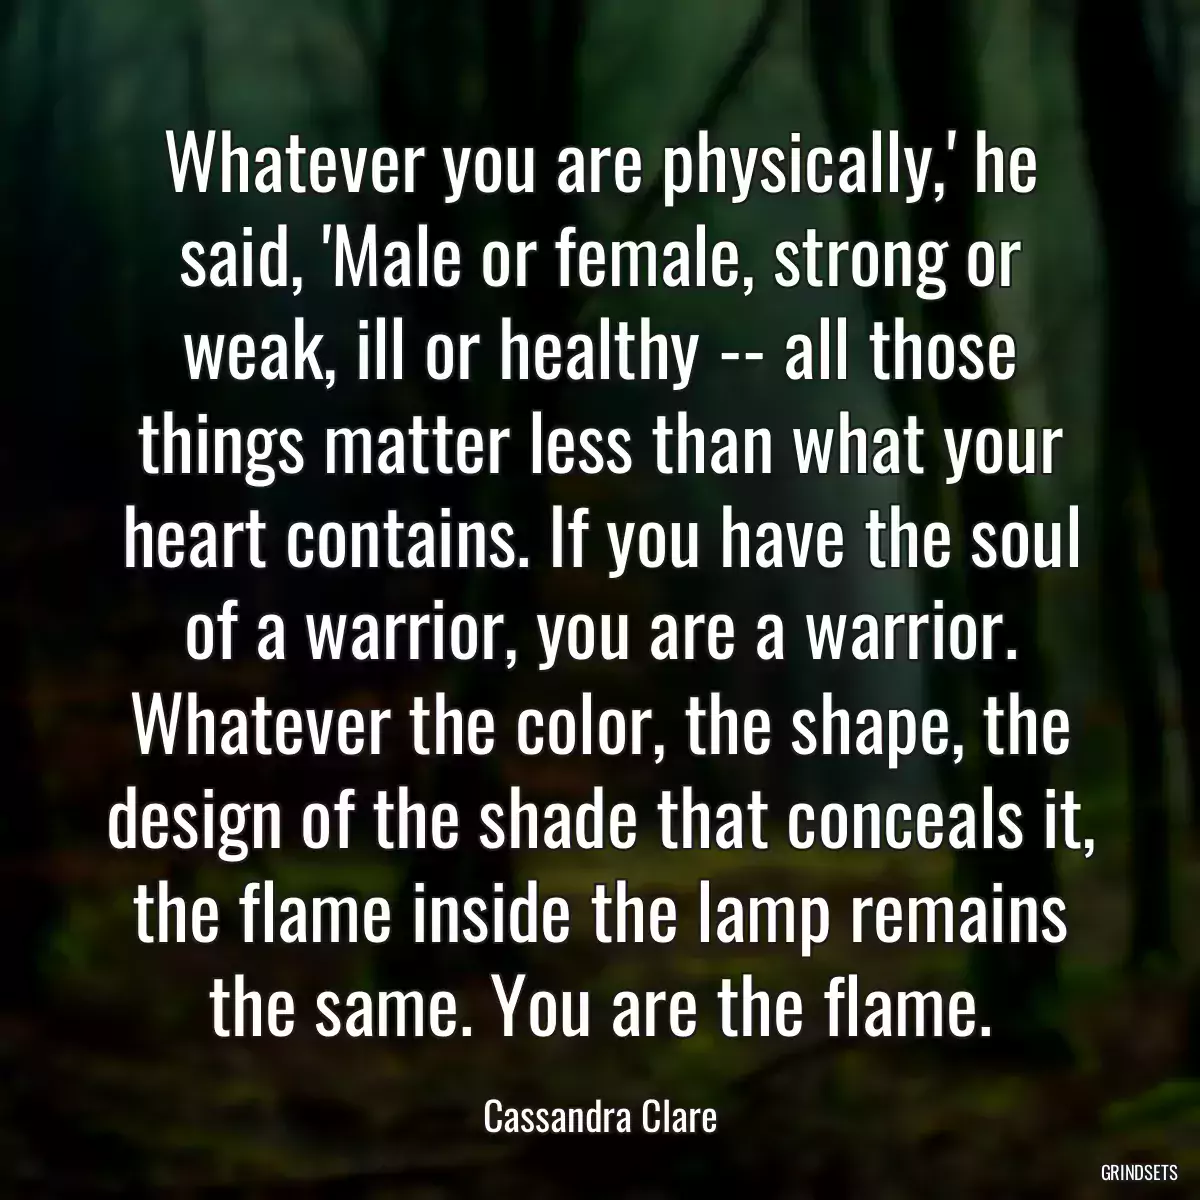 Whatever you are physically,\' he said, \'Male or female, strong or weak, ill or healthy -- all those things matter less than what your heart contains. If you have the soul of a warrior, you are a warrior. Whatever the color, the shape, the design of the shade that conceals it, the flame inside the lamp remains the same. You are the flame.